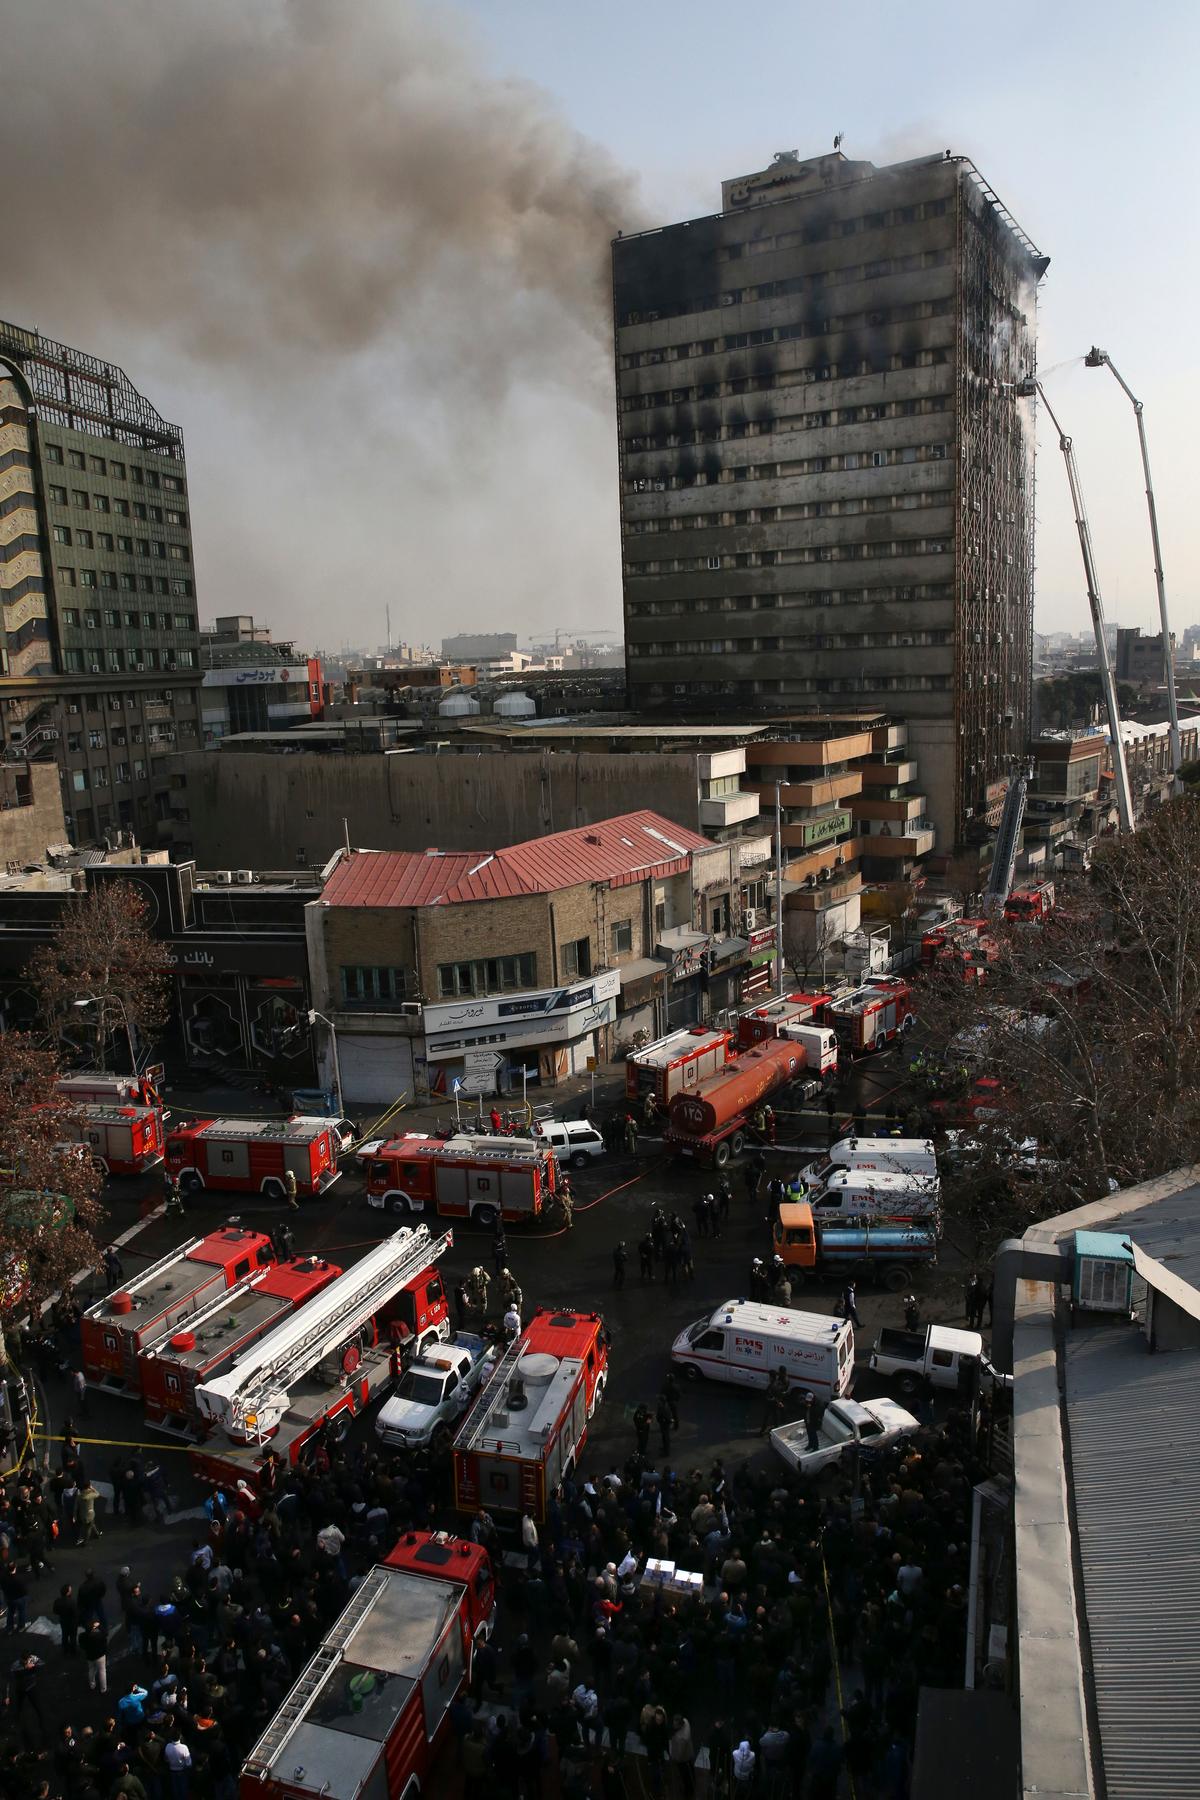 Smoke rises up from the Plasco building where firefighters work to extinguish fire in central Tehran, Iran on Jan. 19, 2017. (AP Photo/Vahid Salemi)